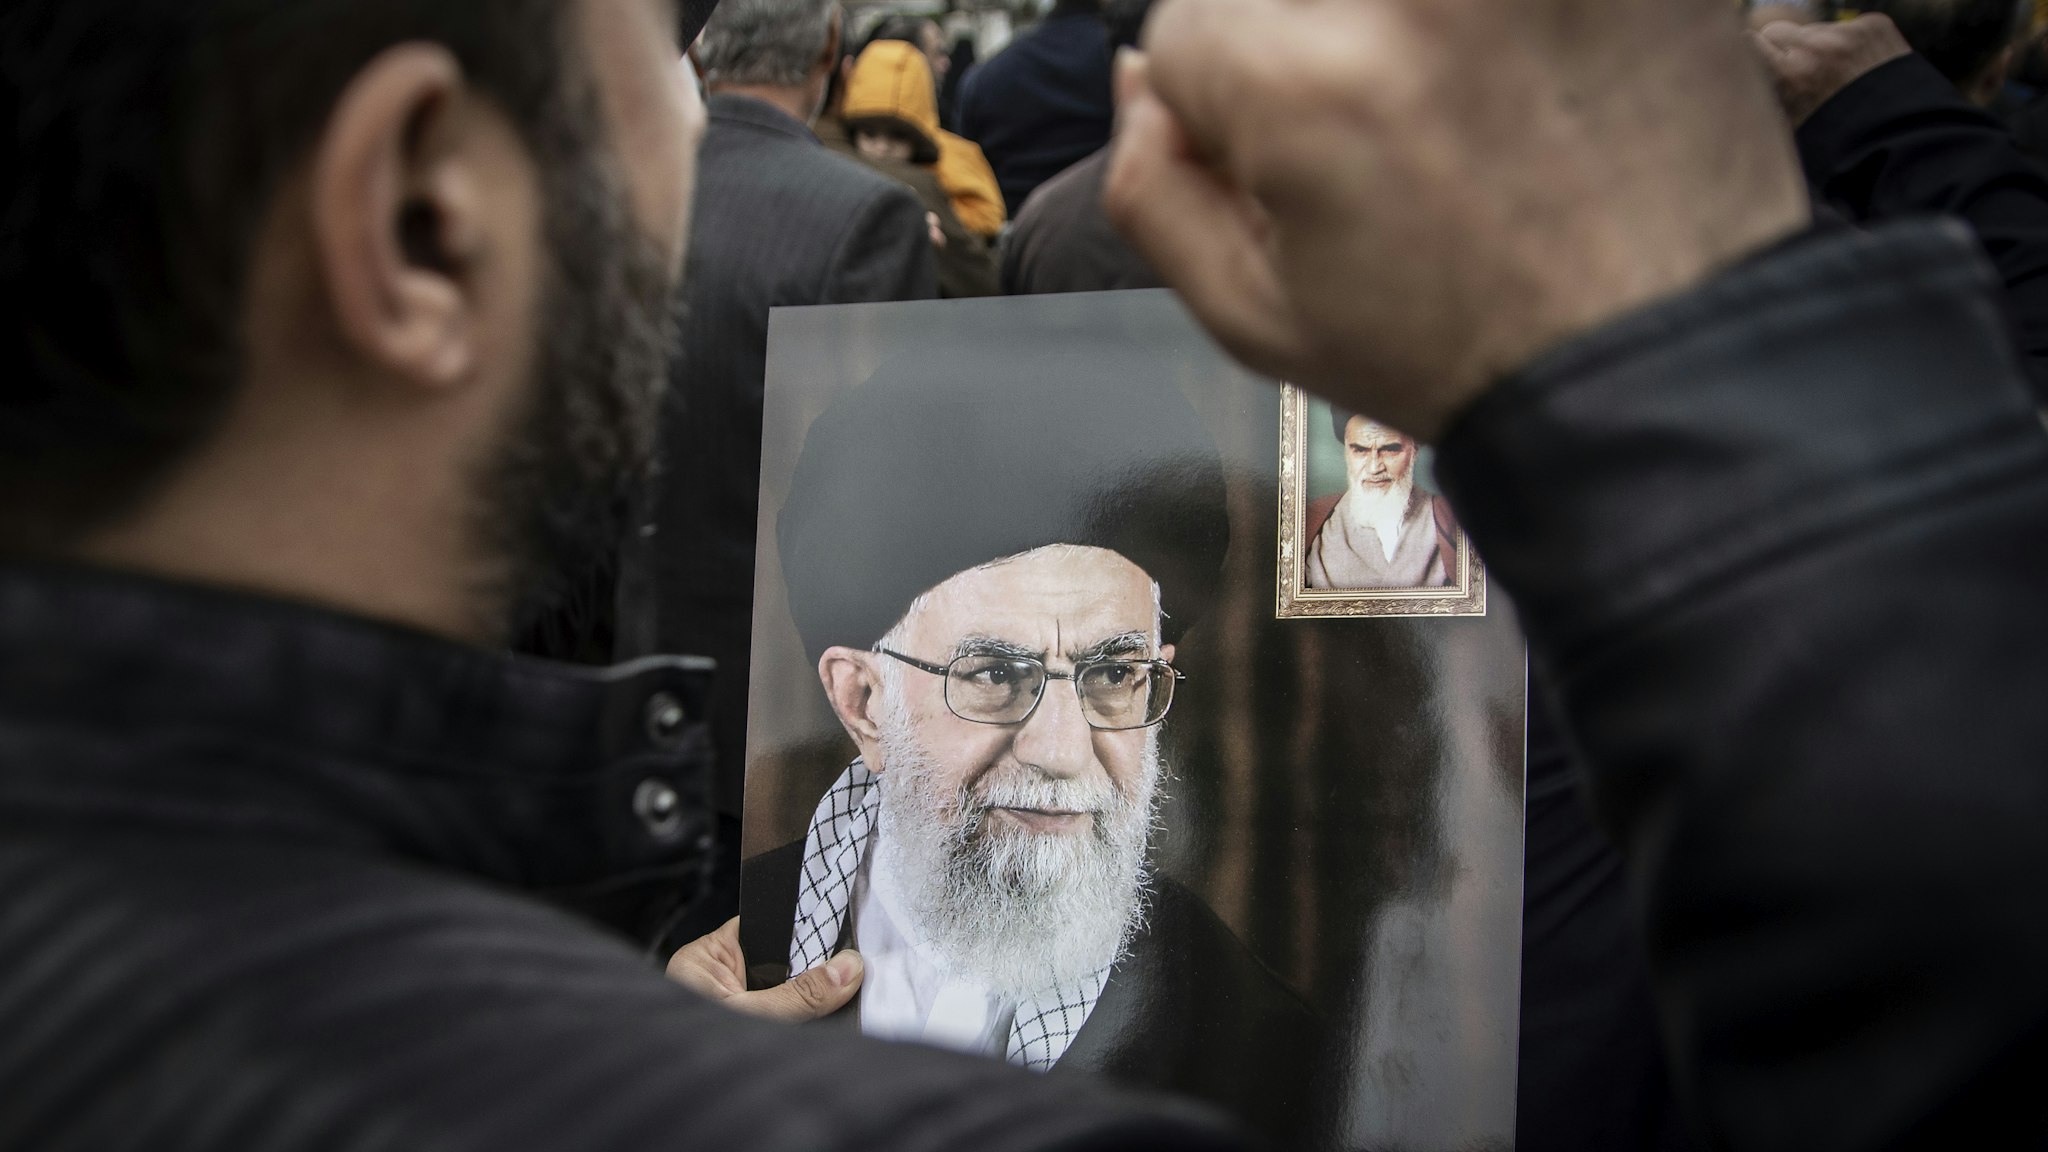 RASHT, GILAN, IRAN - 2020/01/03: A man protesting the killing of General Qasem Soleimani while carrying a poster of Iran's leader, Ali Khamenei. After the killing of General Qasem Soleimani, commander of Quds Force by the US Army in Iraq, people throughout Iran and the city of Rasht mourned him on the streets. (Photo by Babak Jeddi/SOPA Images/LightRocket via Getty Images)